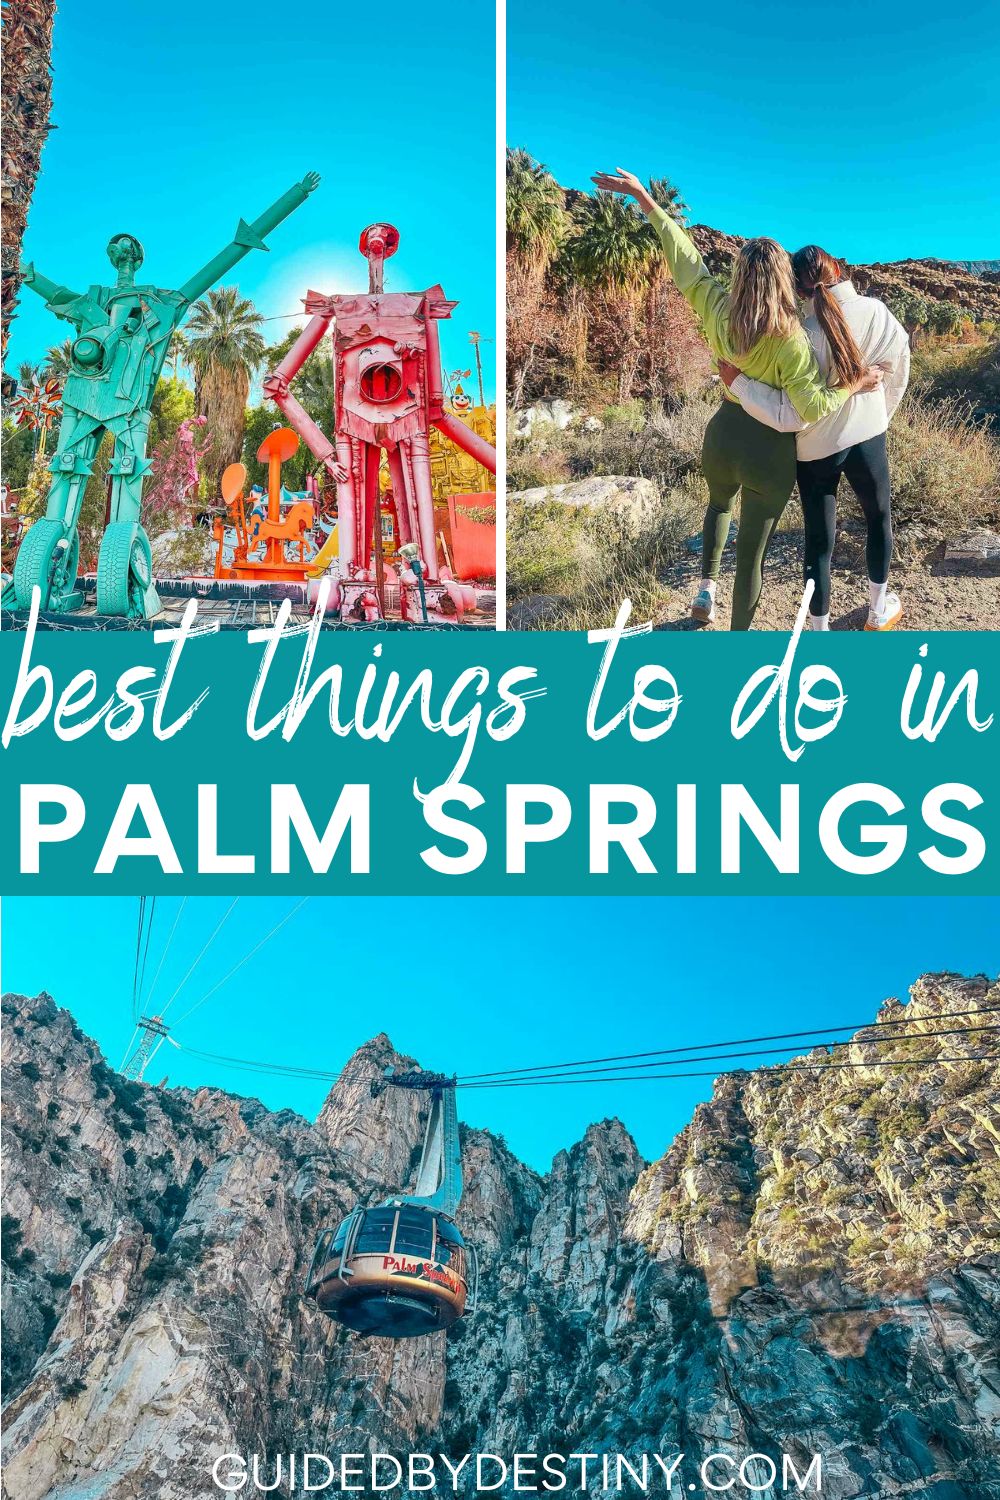 best things to do in palm springs california